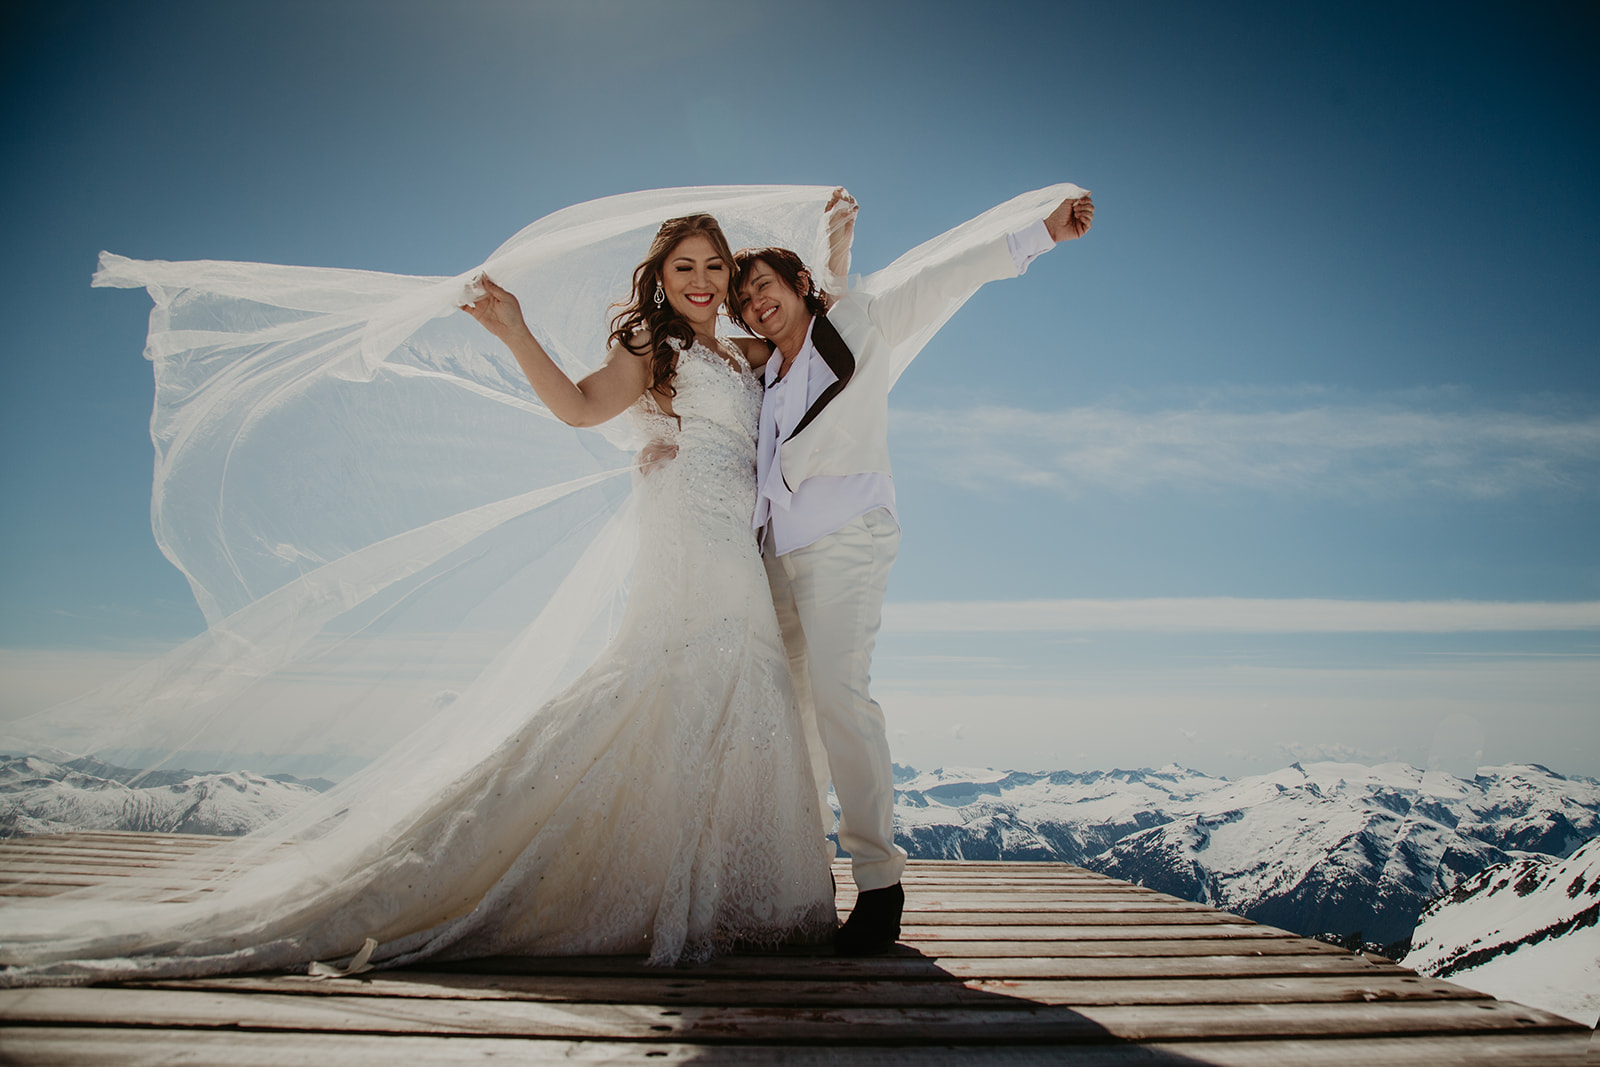 Squamish elopement with Blackcomb Helicopter in Tantalus Provincial Park